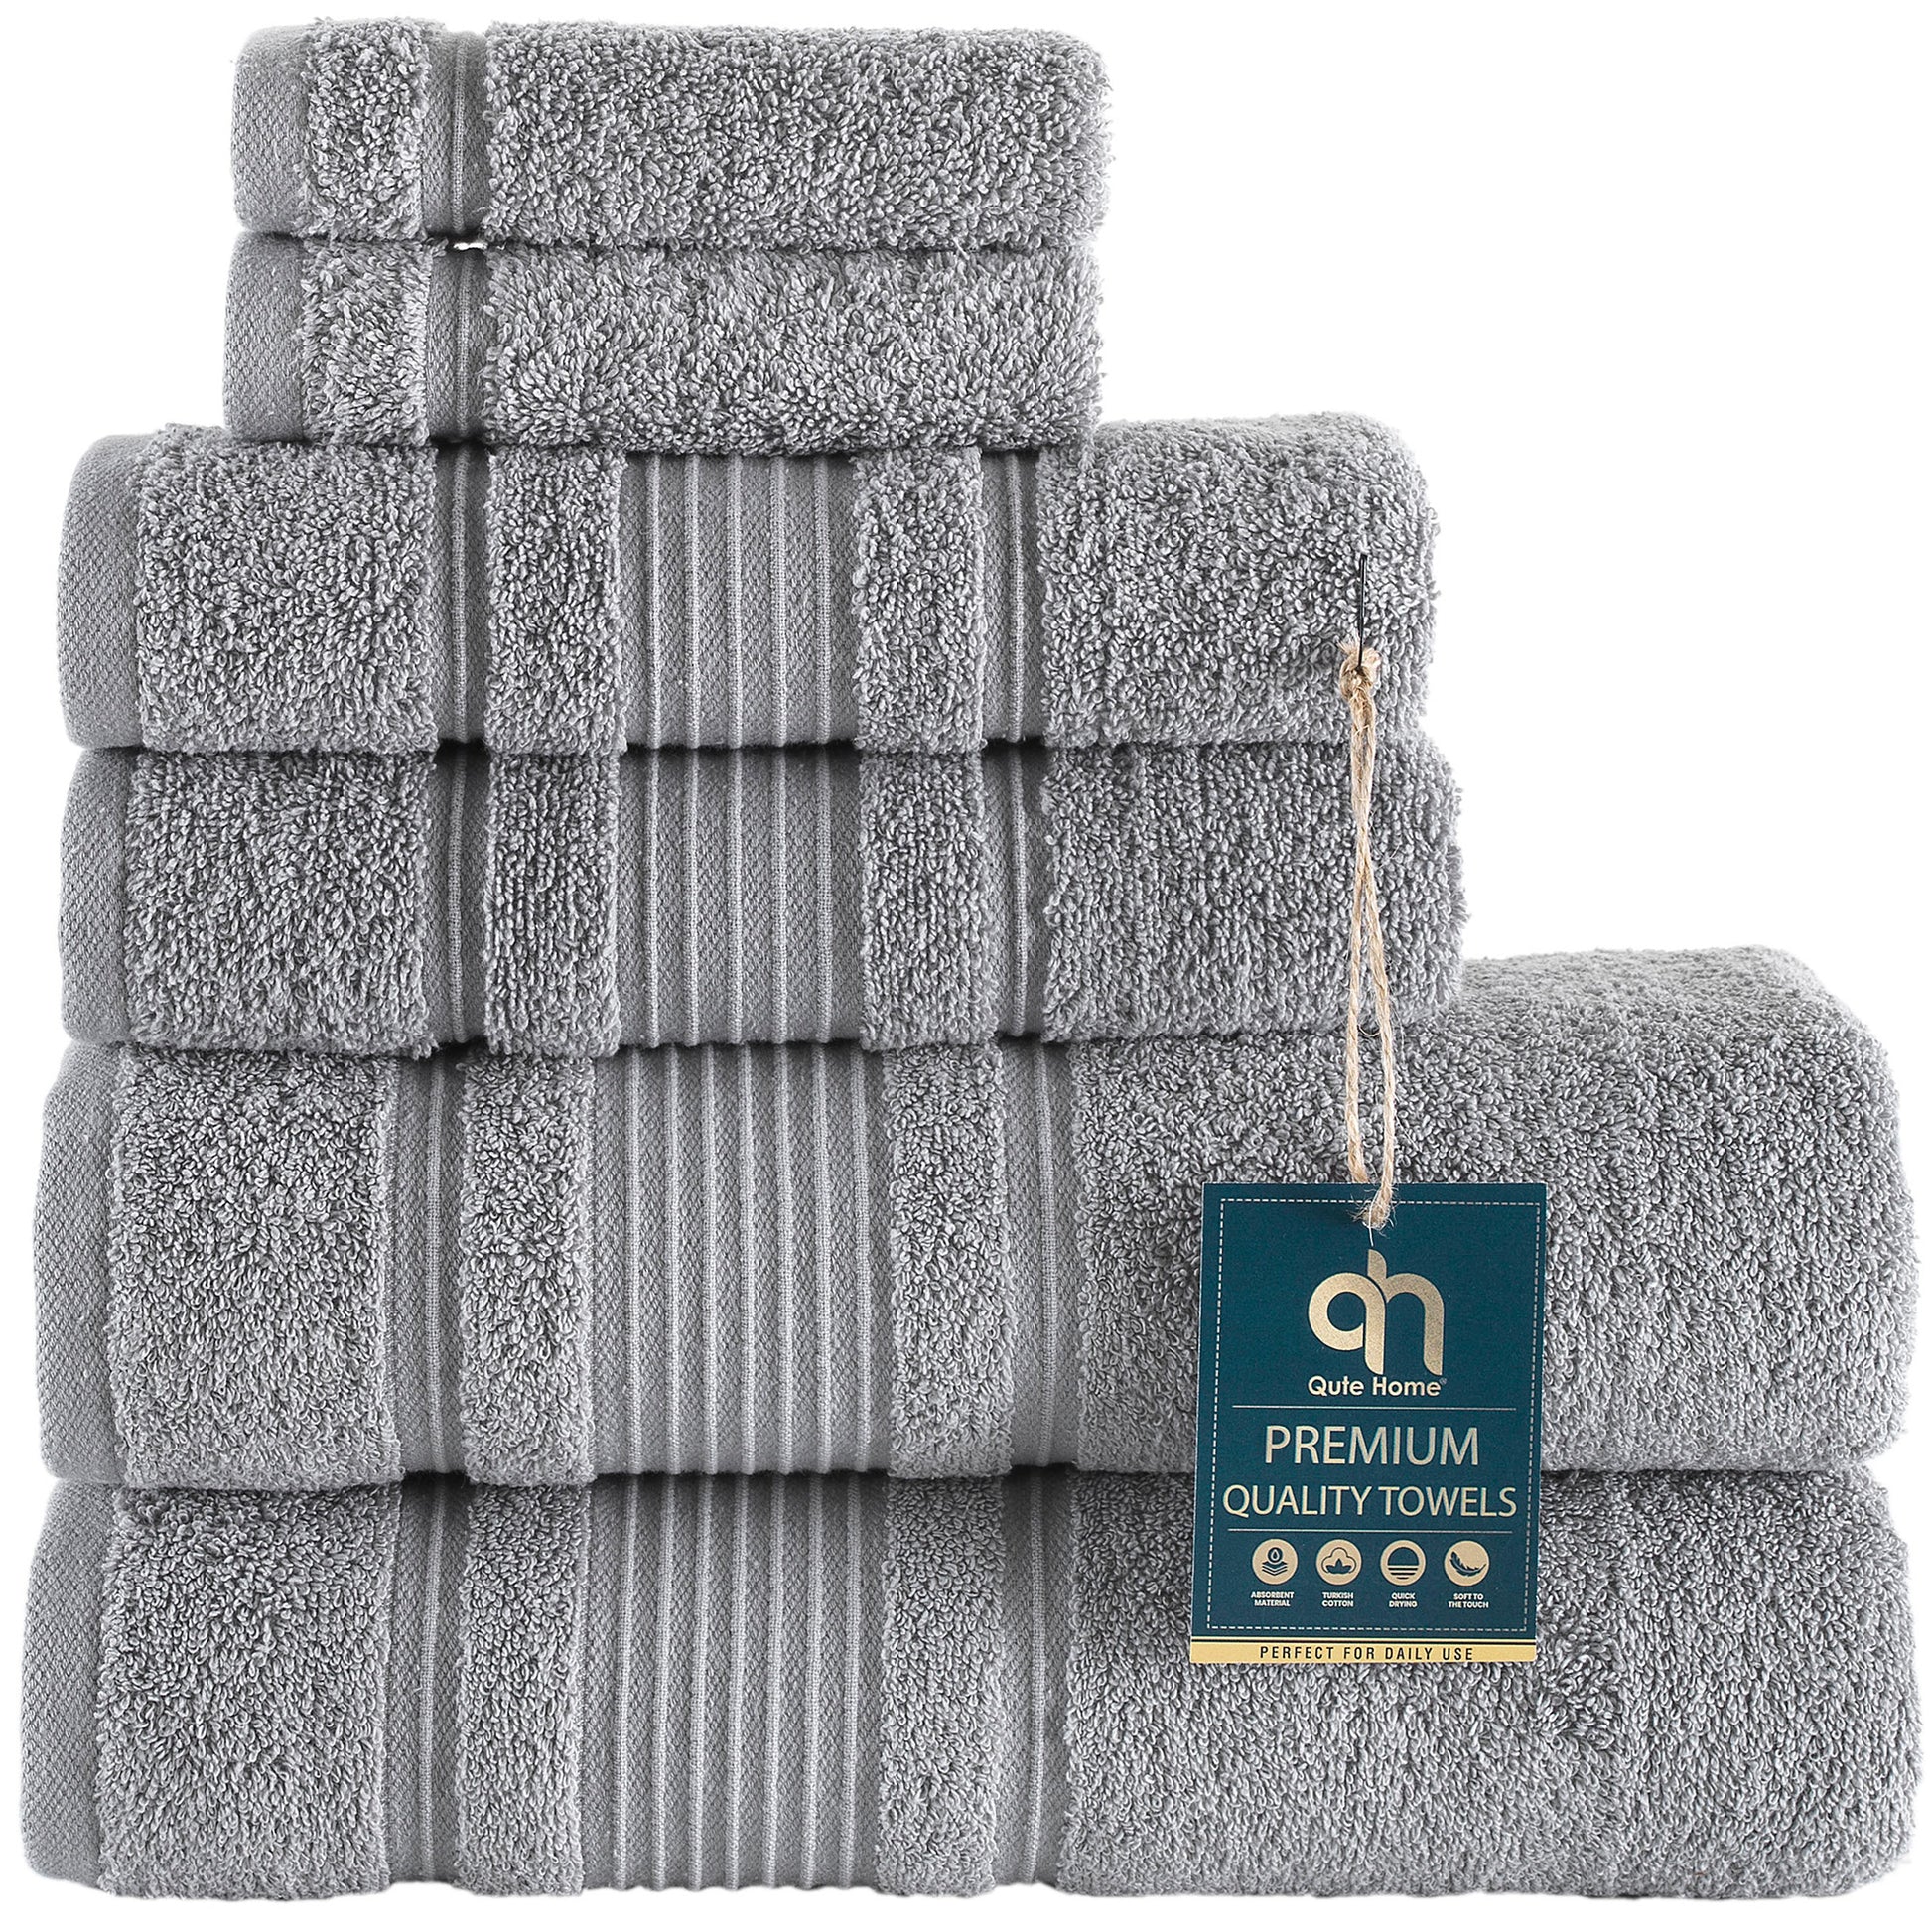 Texrise Premium Collection Laguna Series Hotel and Spa Luxury Bath Towels 27 x 50 Inches 6 Pack